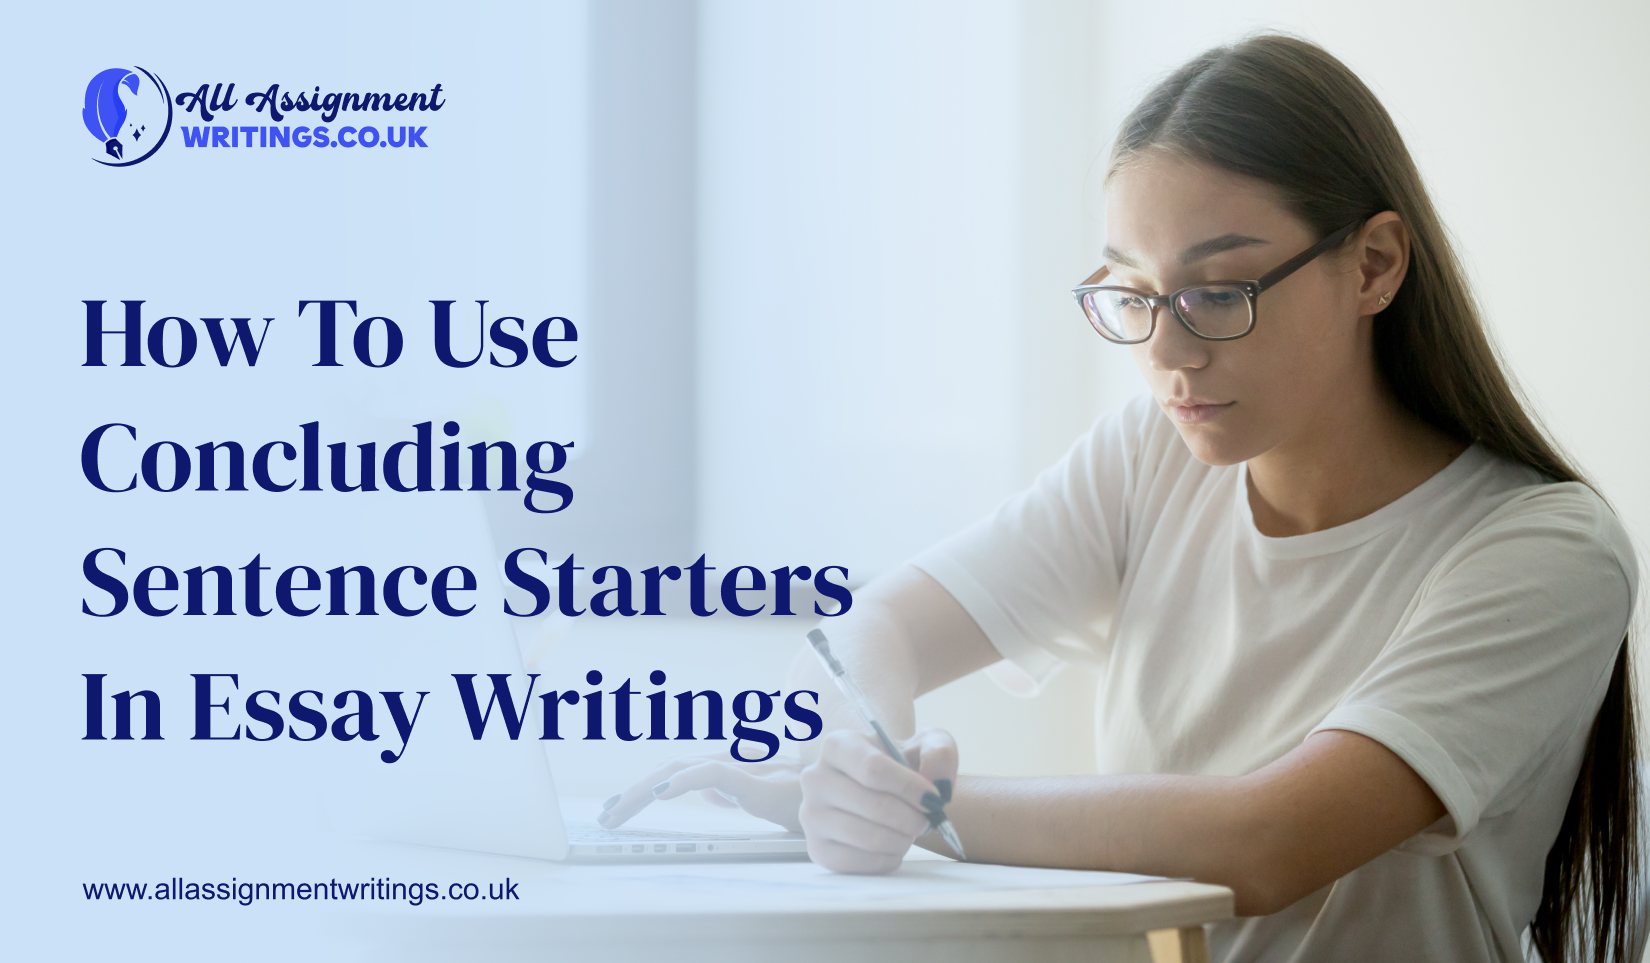 How to use Concluding Sentence Starters in Essay Writings